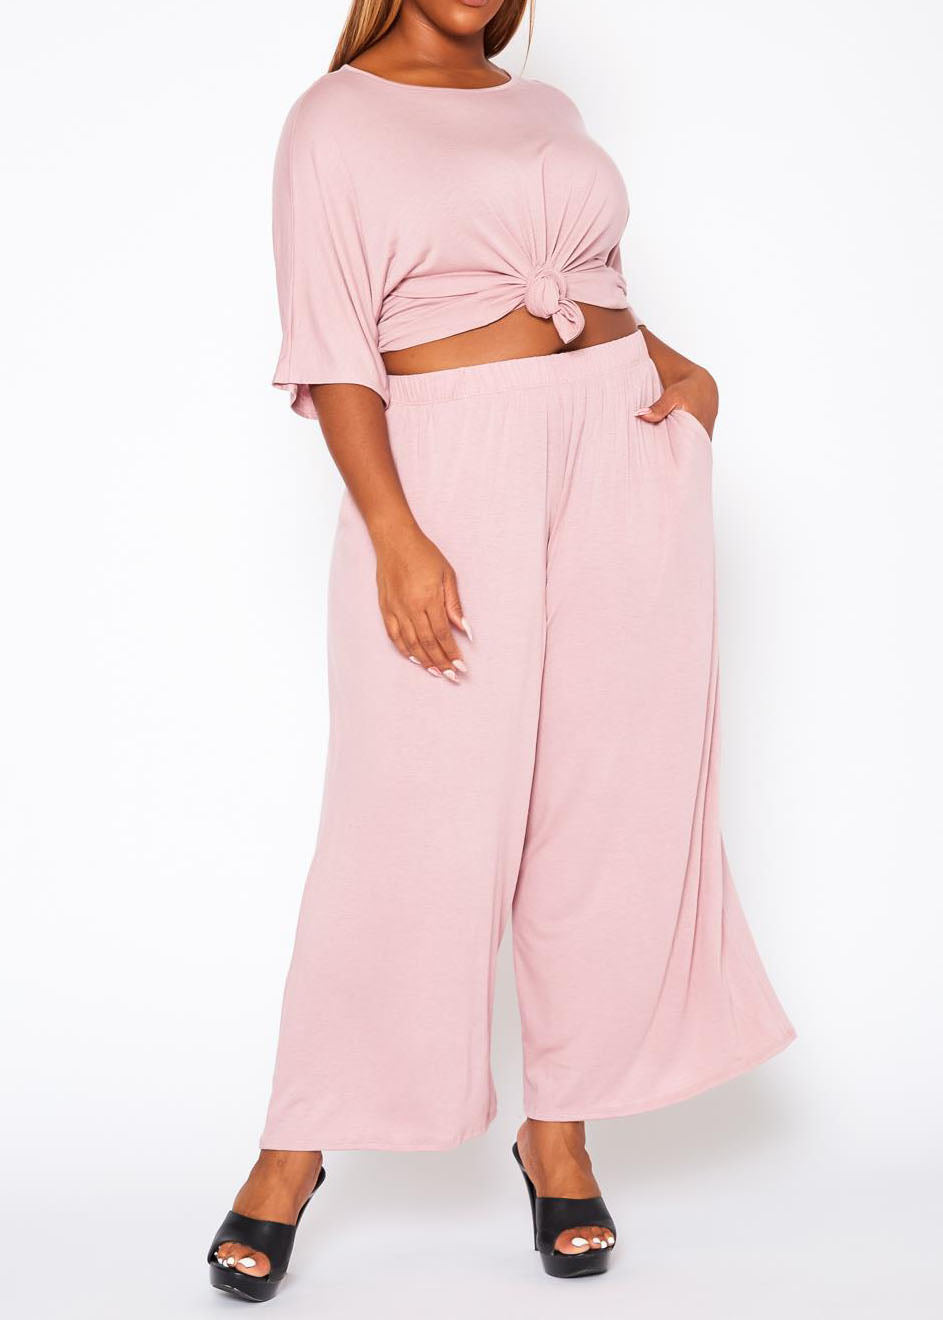 Hi Curvy Plus Size Women Relaxed Fit Top & Flare Pants Sets